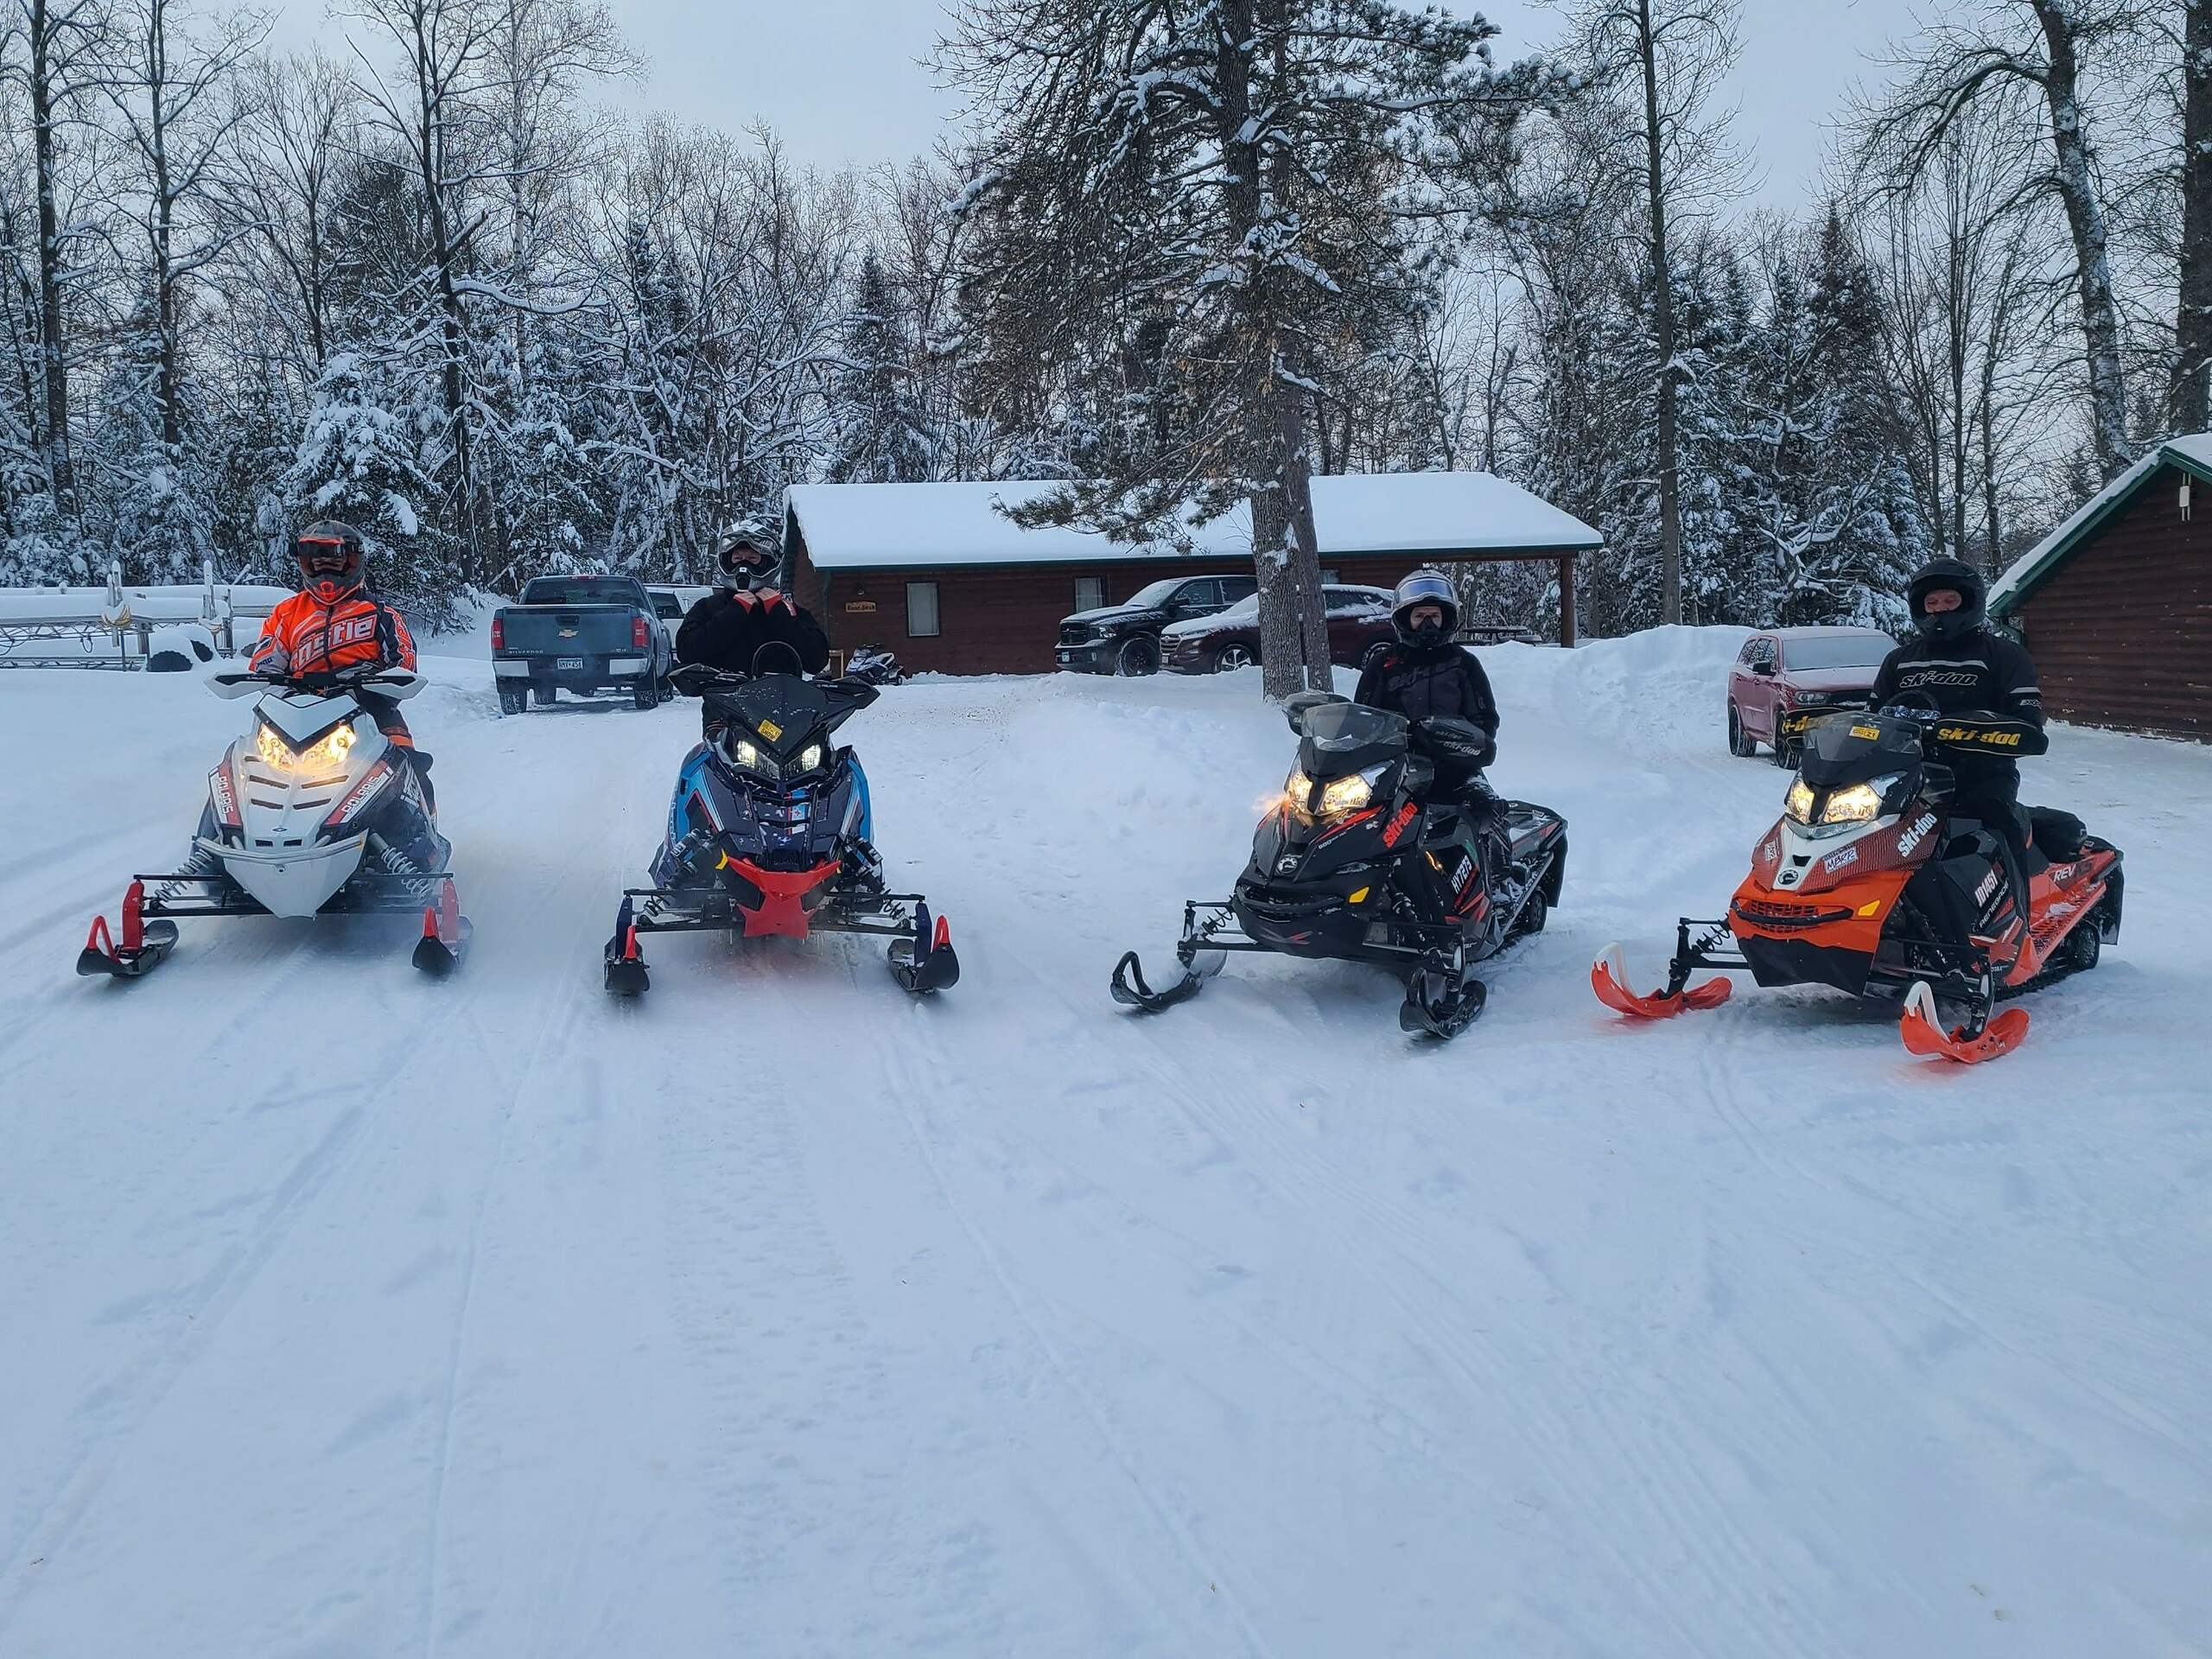 snowmobilers ready to ride